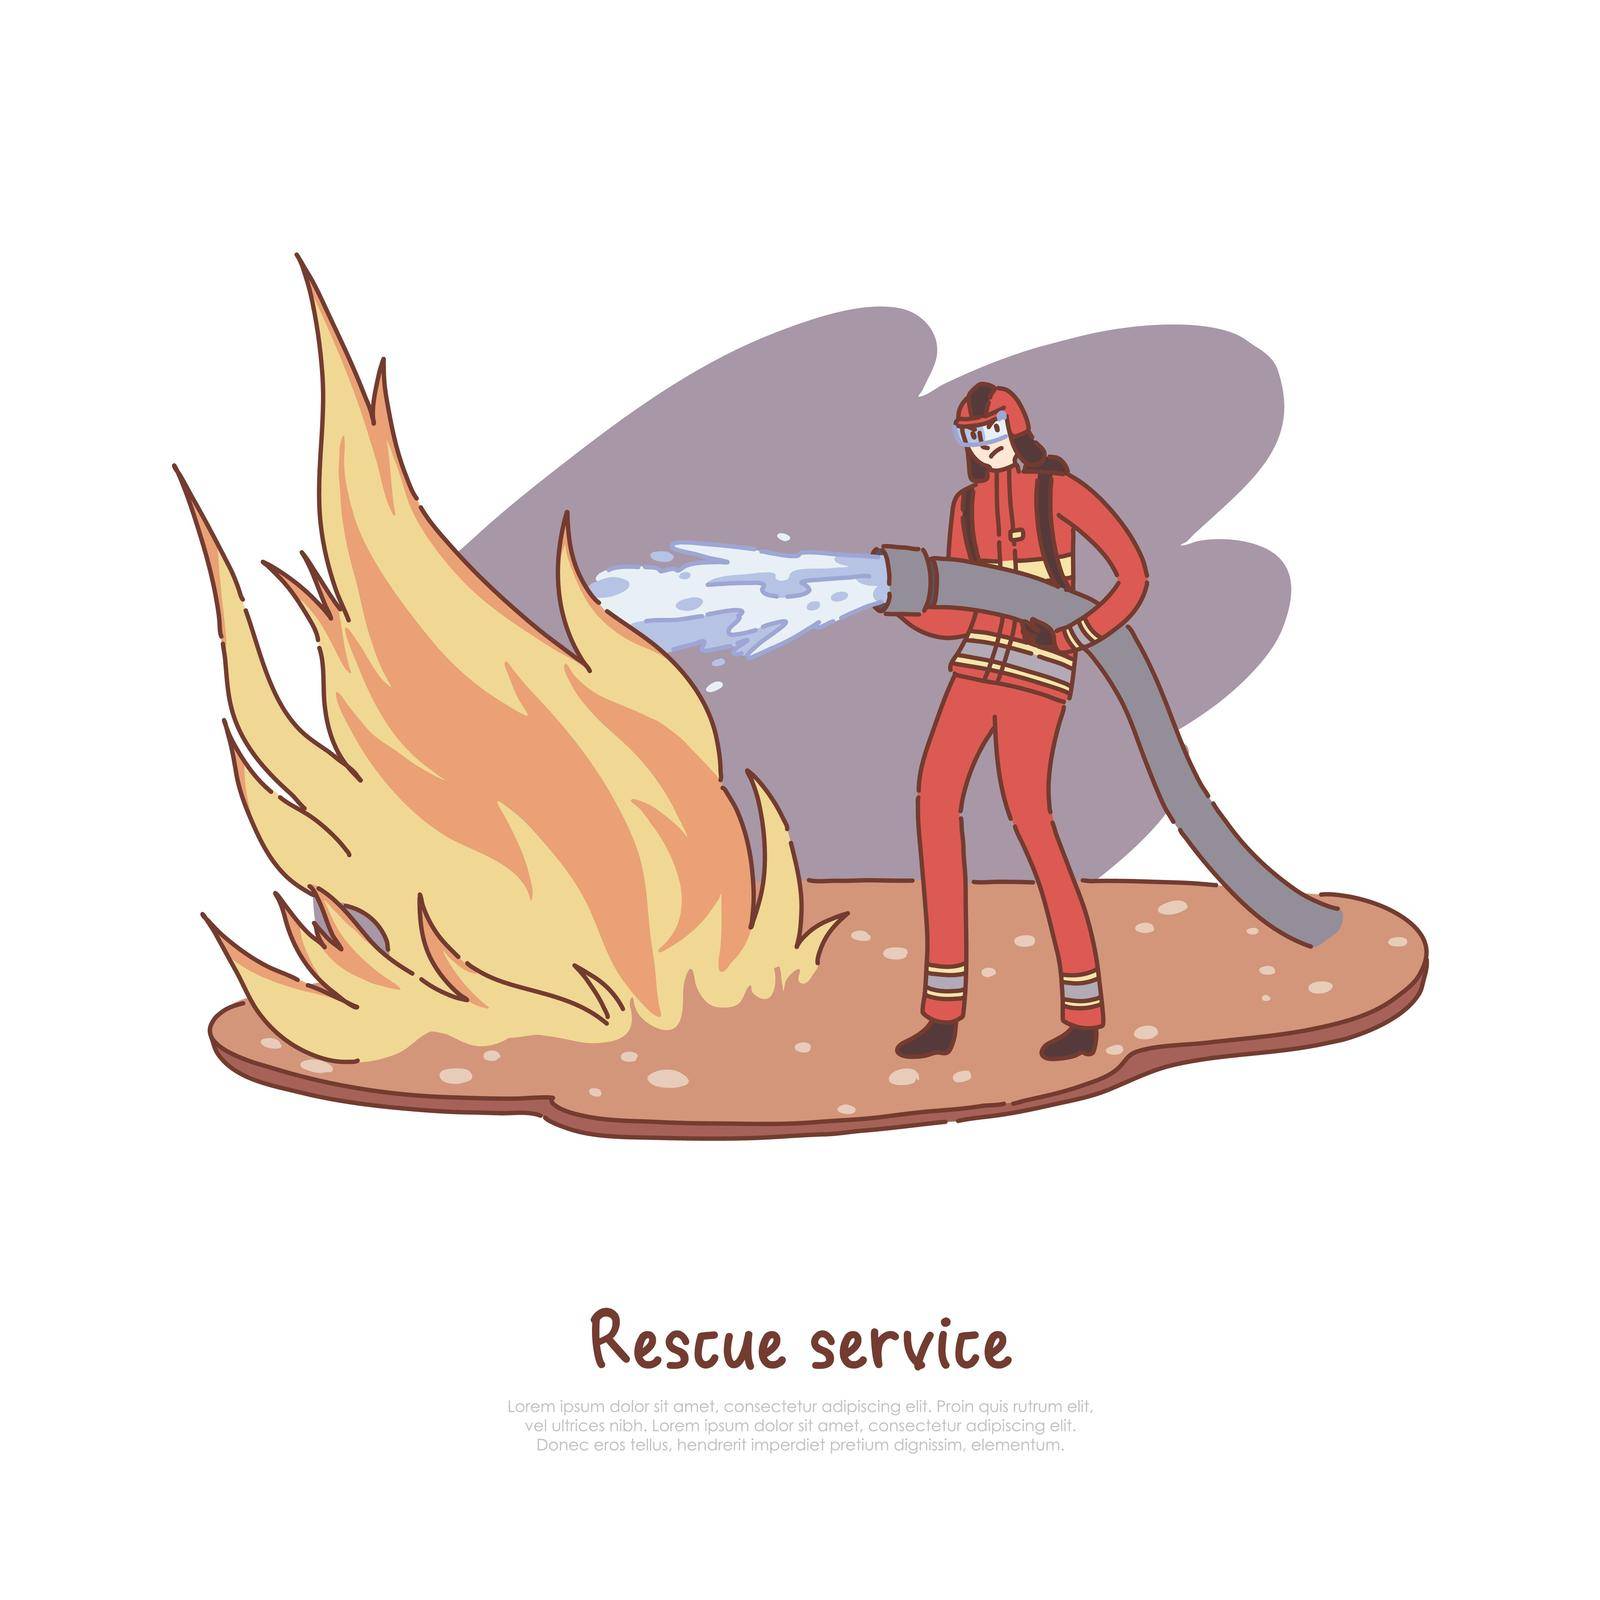 Firefighter puts out fire with water, brave fireman in uniform holding hose, dangerous profession, rescue service banner by VECTORIUM